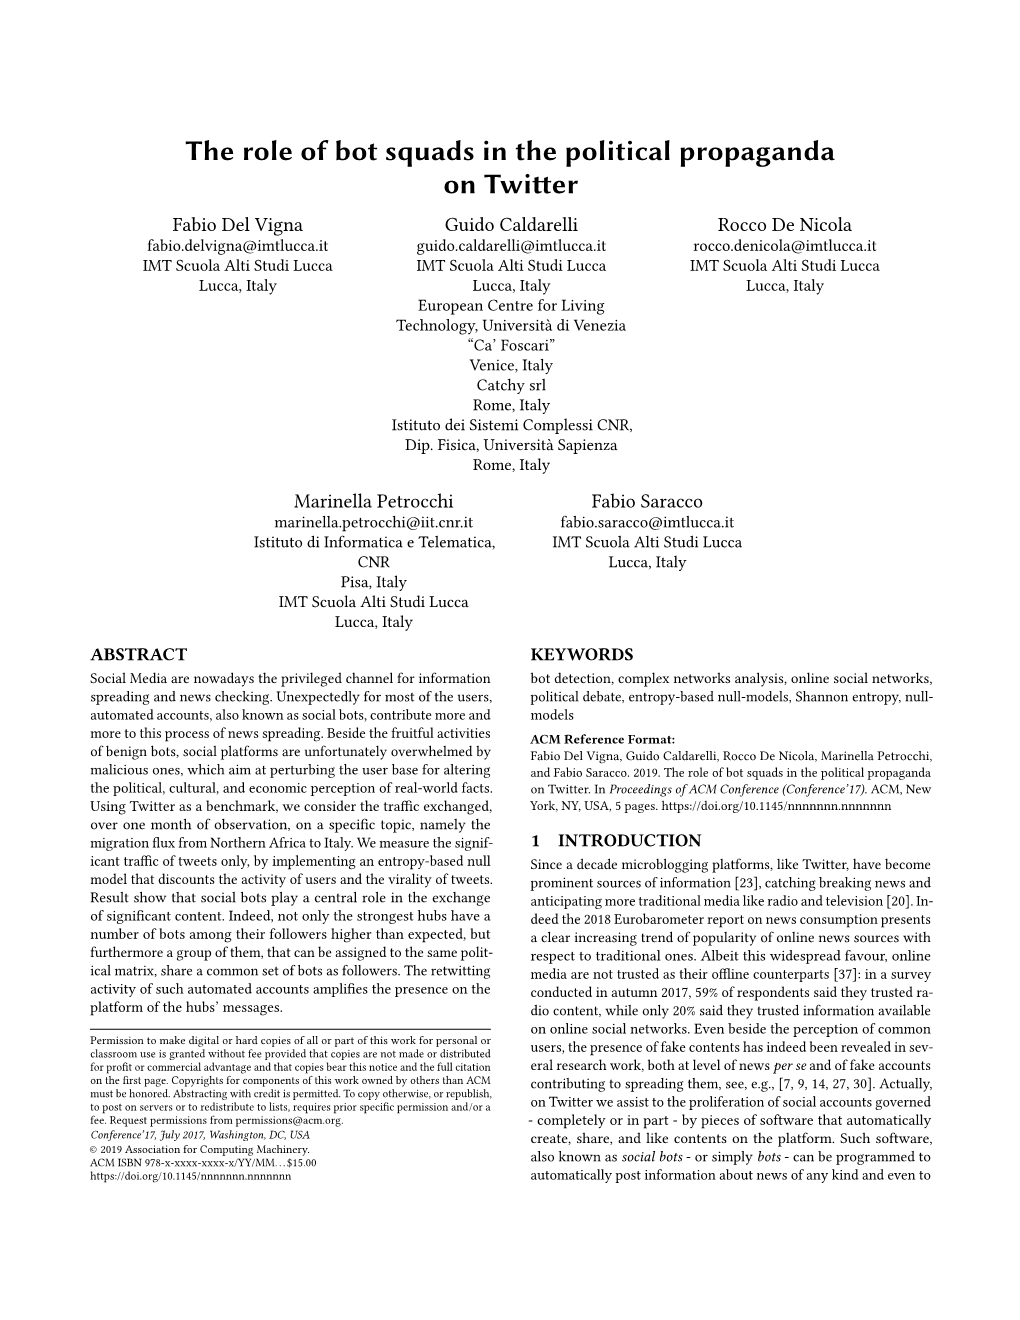 The Role of Bot Squads in the Political Propaganda on Twitter